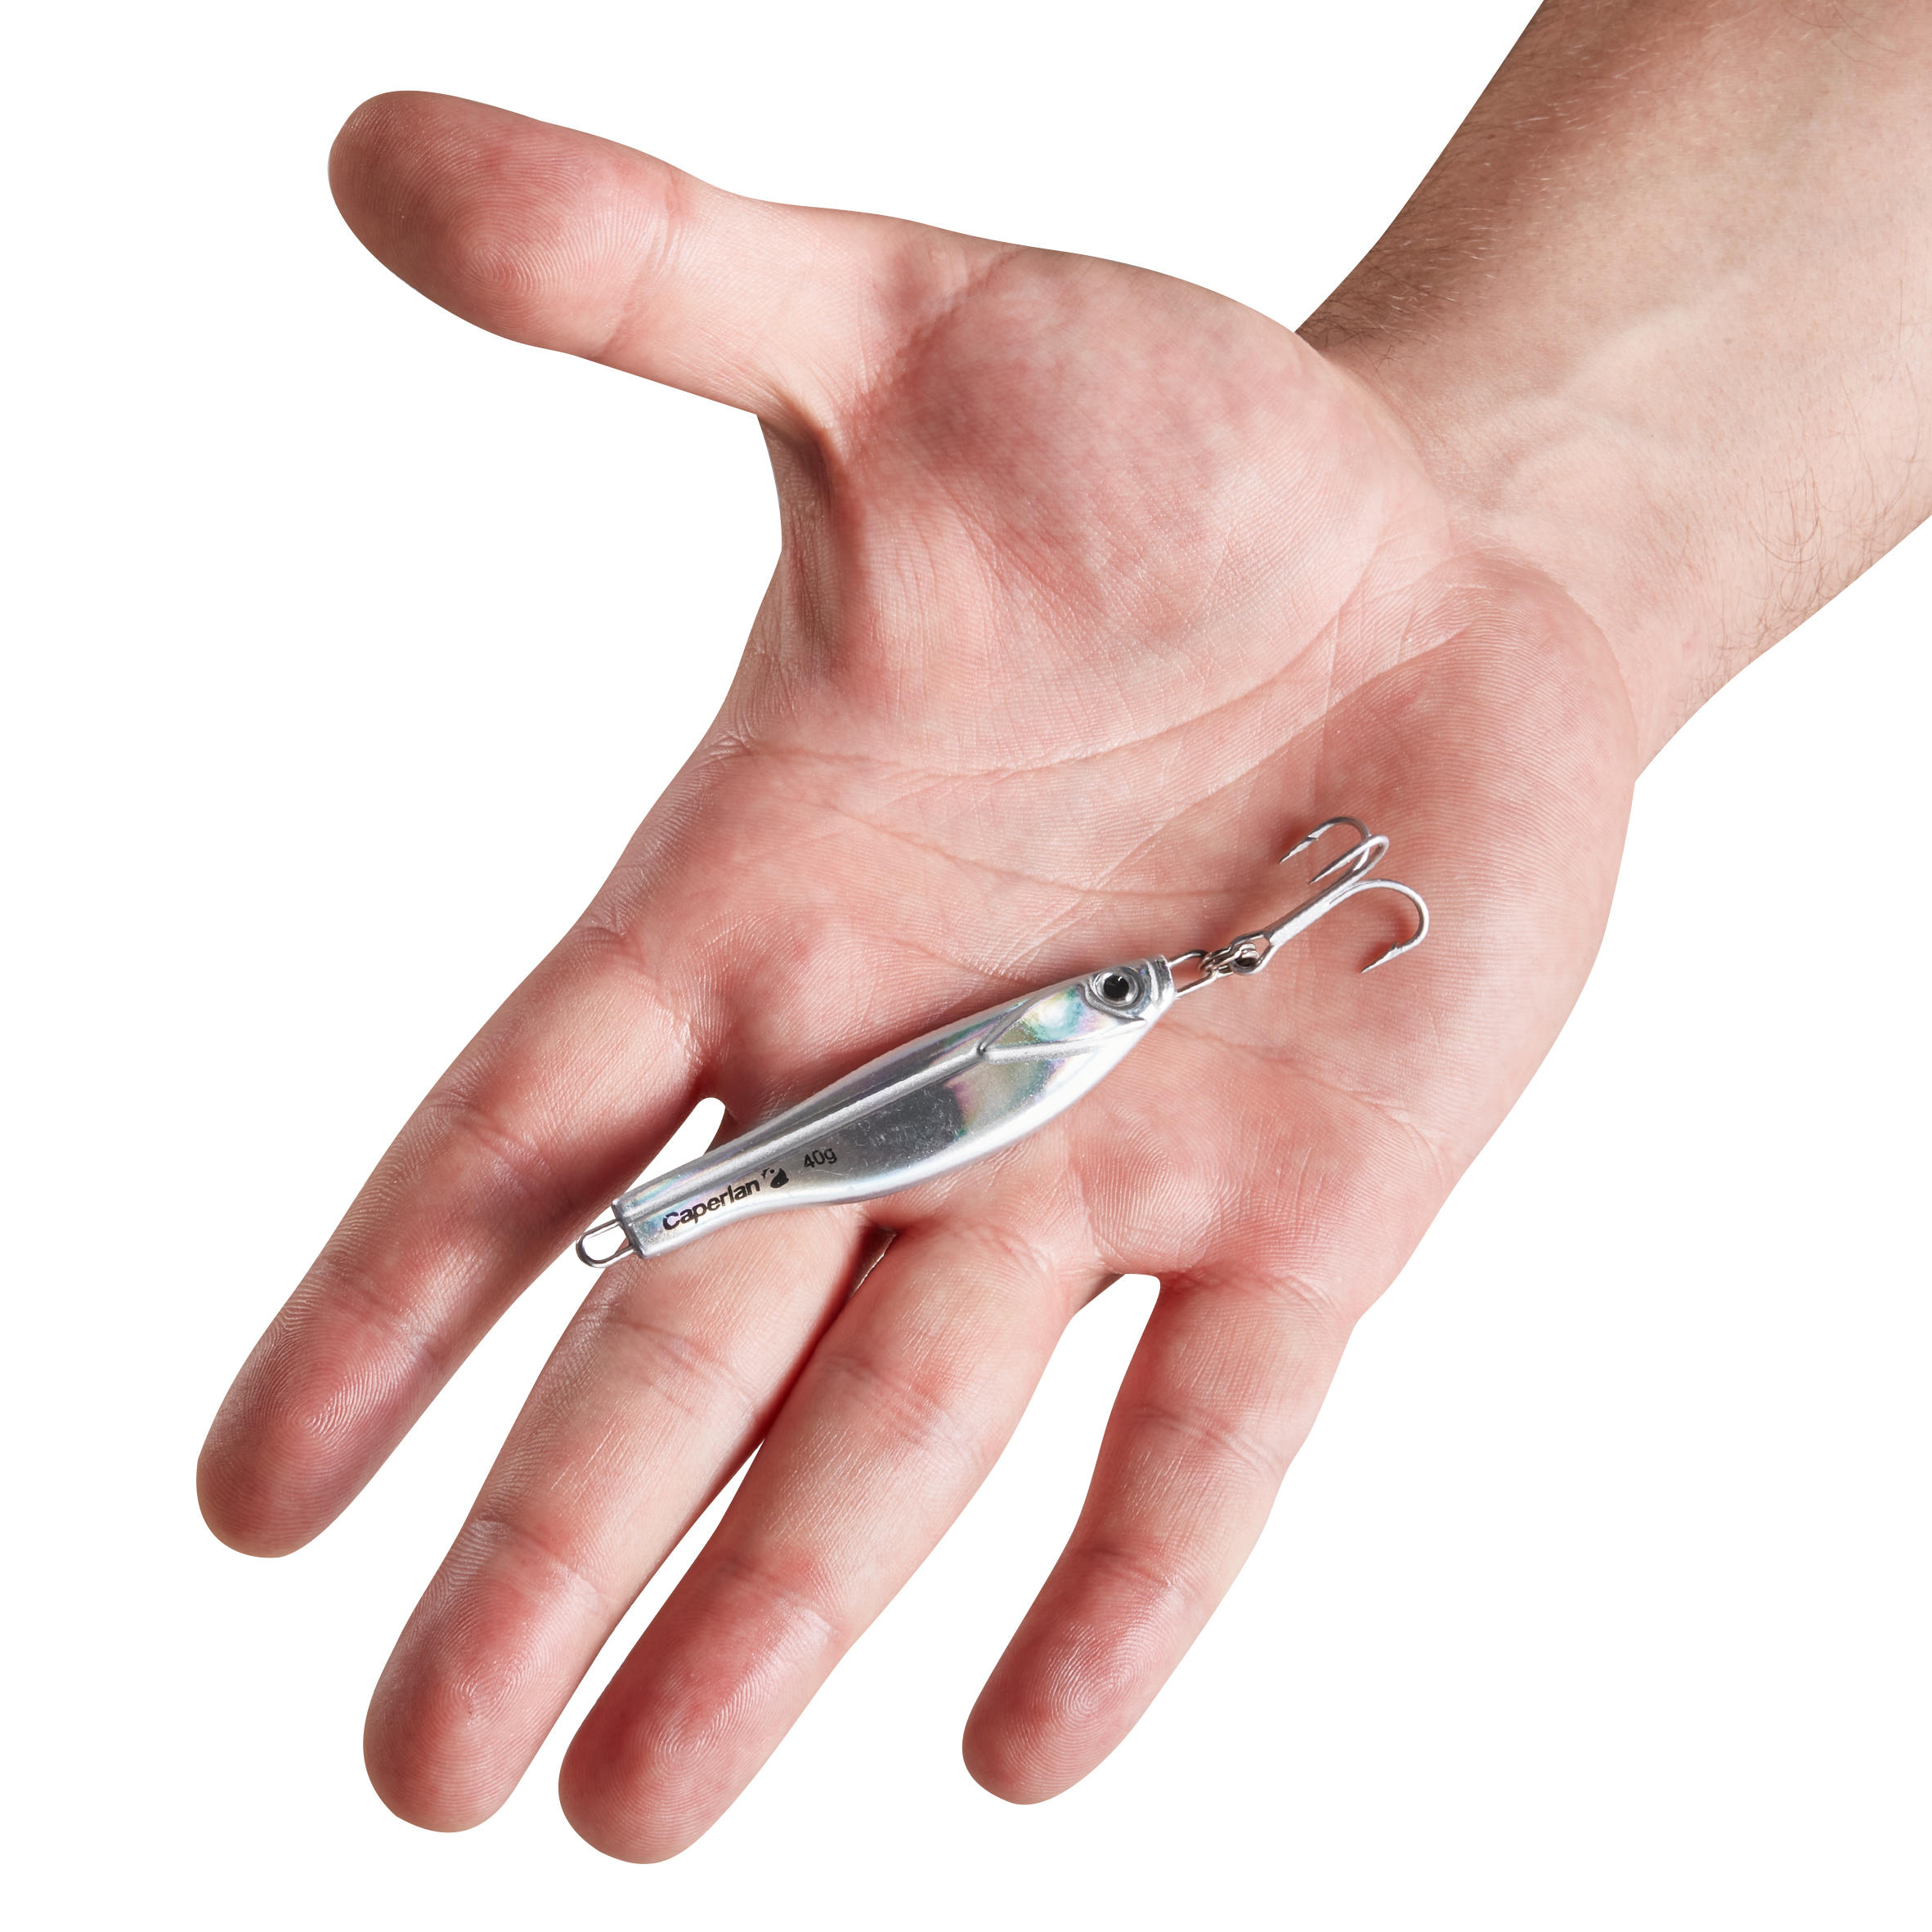 deccan angler Spoon Stainless Steel Fishing Lure Price in India - Buy  deccan angler Spoon Stainless Steel Fishing Lure online at